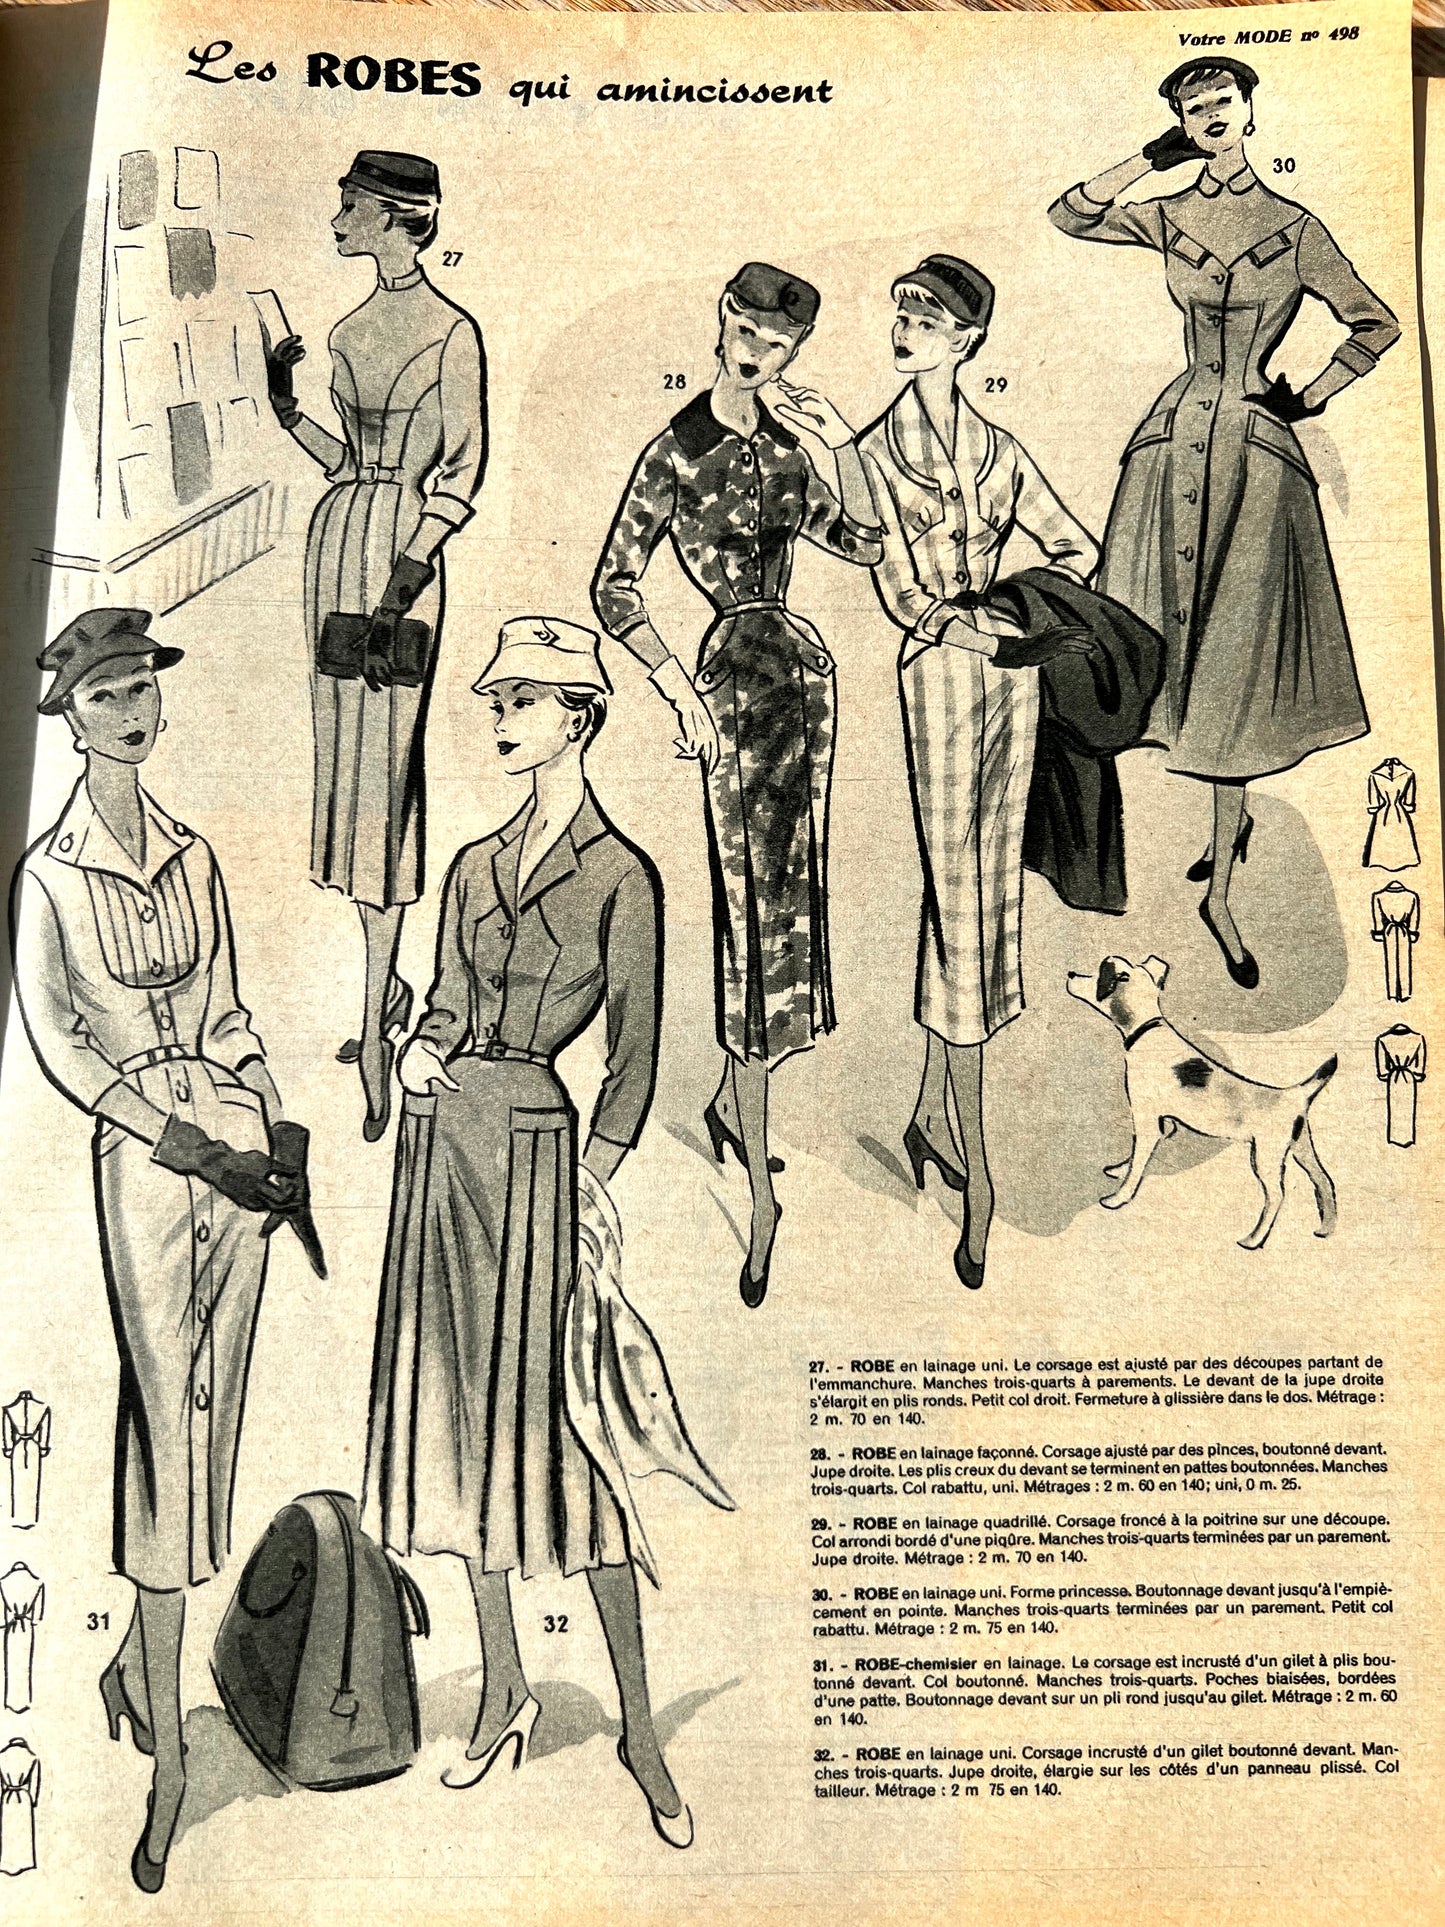 Winter 1956 Fashions in September 1956 French Magazine Votre Mode incl Embroidery Pattern